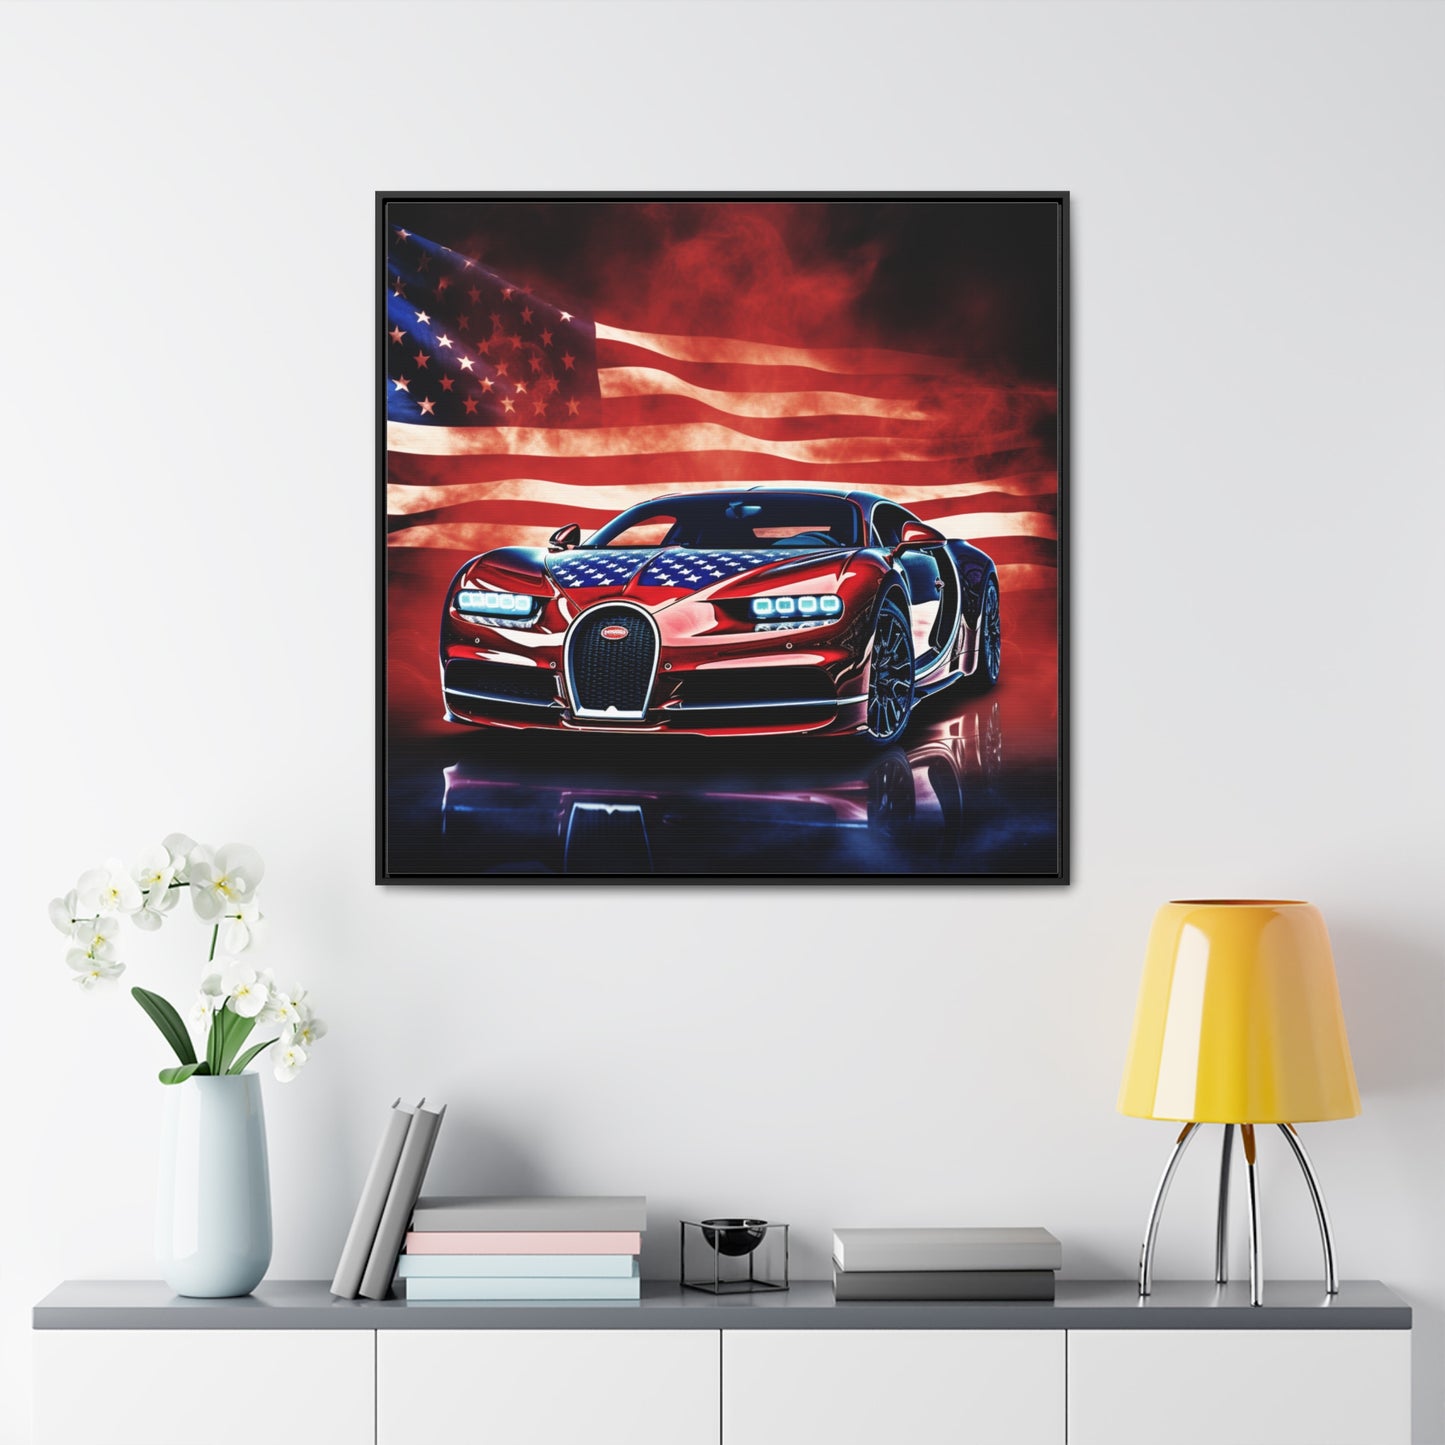 Gallery Canvas Wraps, Square Frame Abstract American Flag Background Bugatti 3